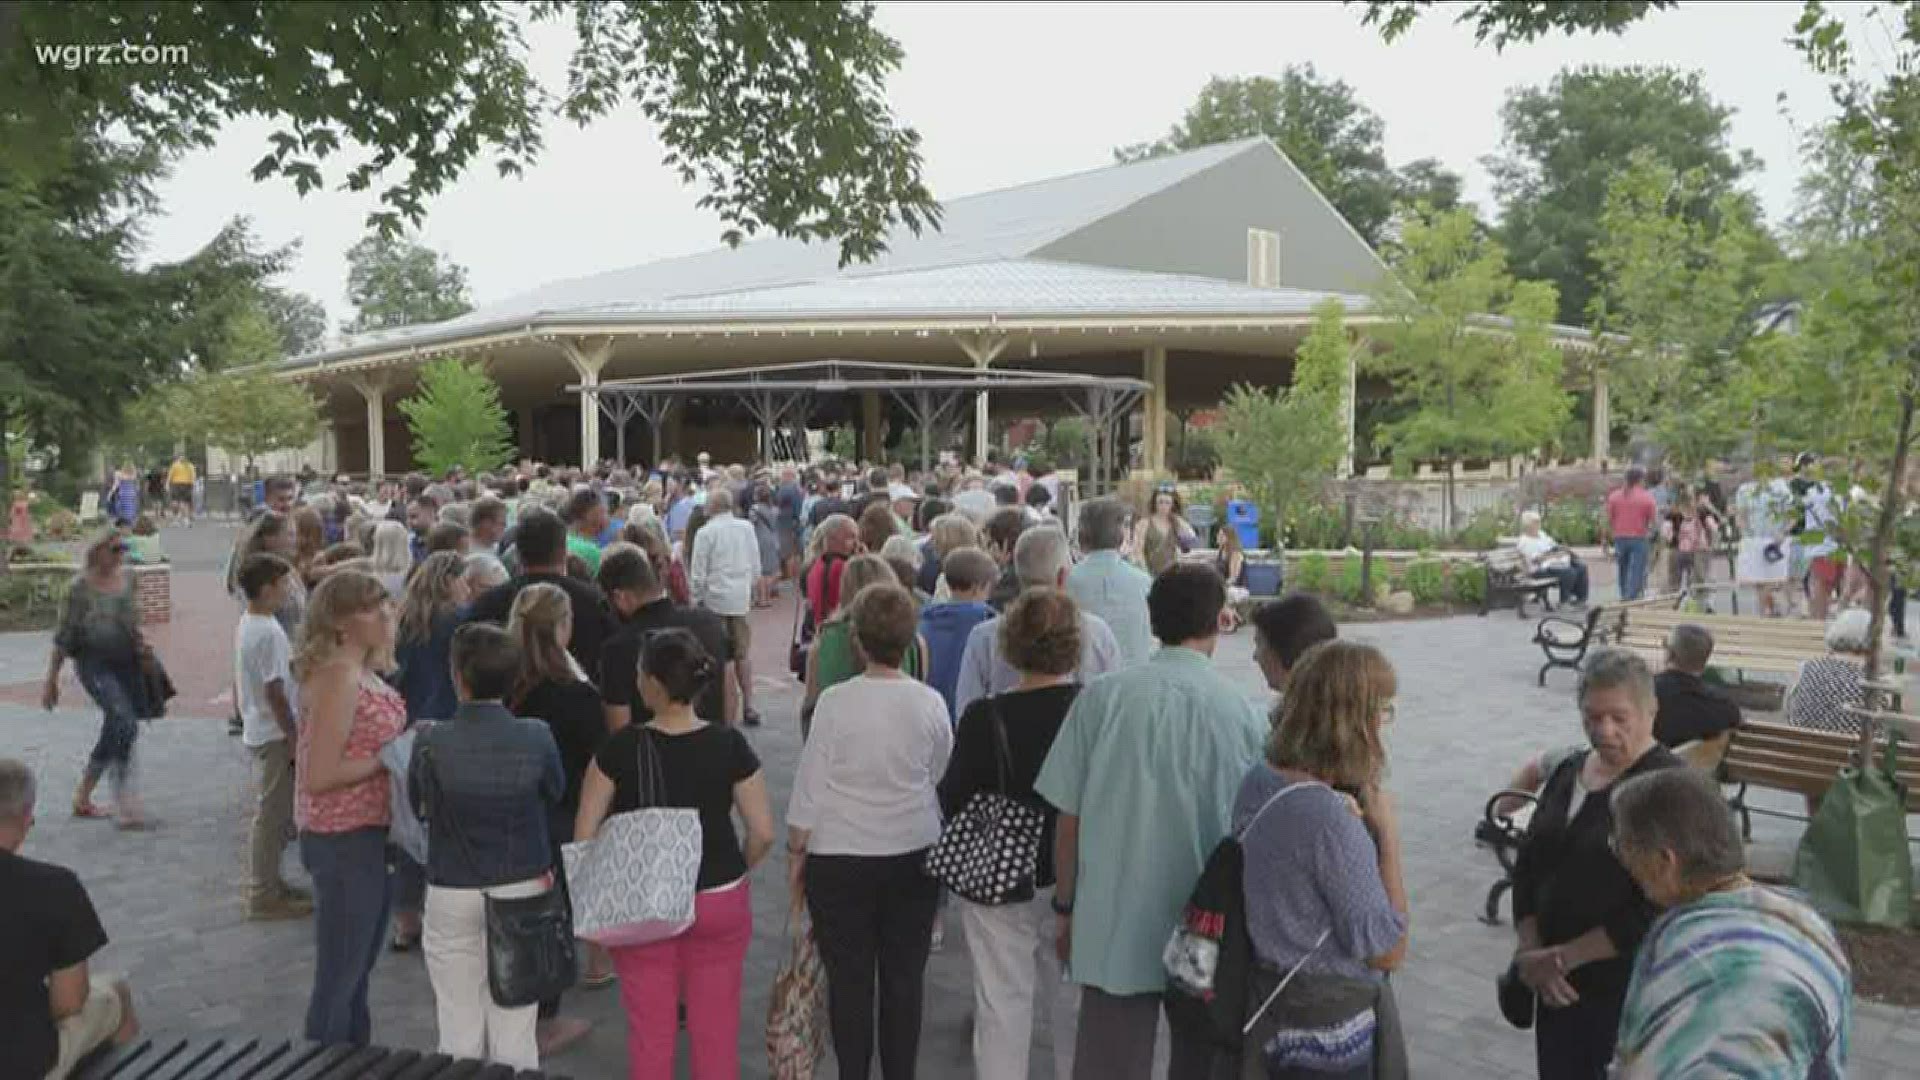 The Chautauqua Institution board voted to call off all in-person events for the summer. Though if the area begins to re-open, they might open up some facilities.